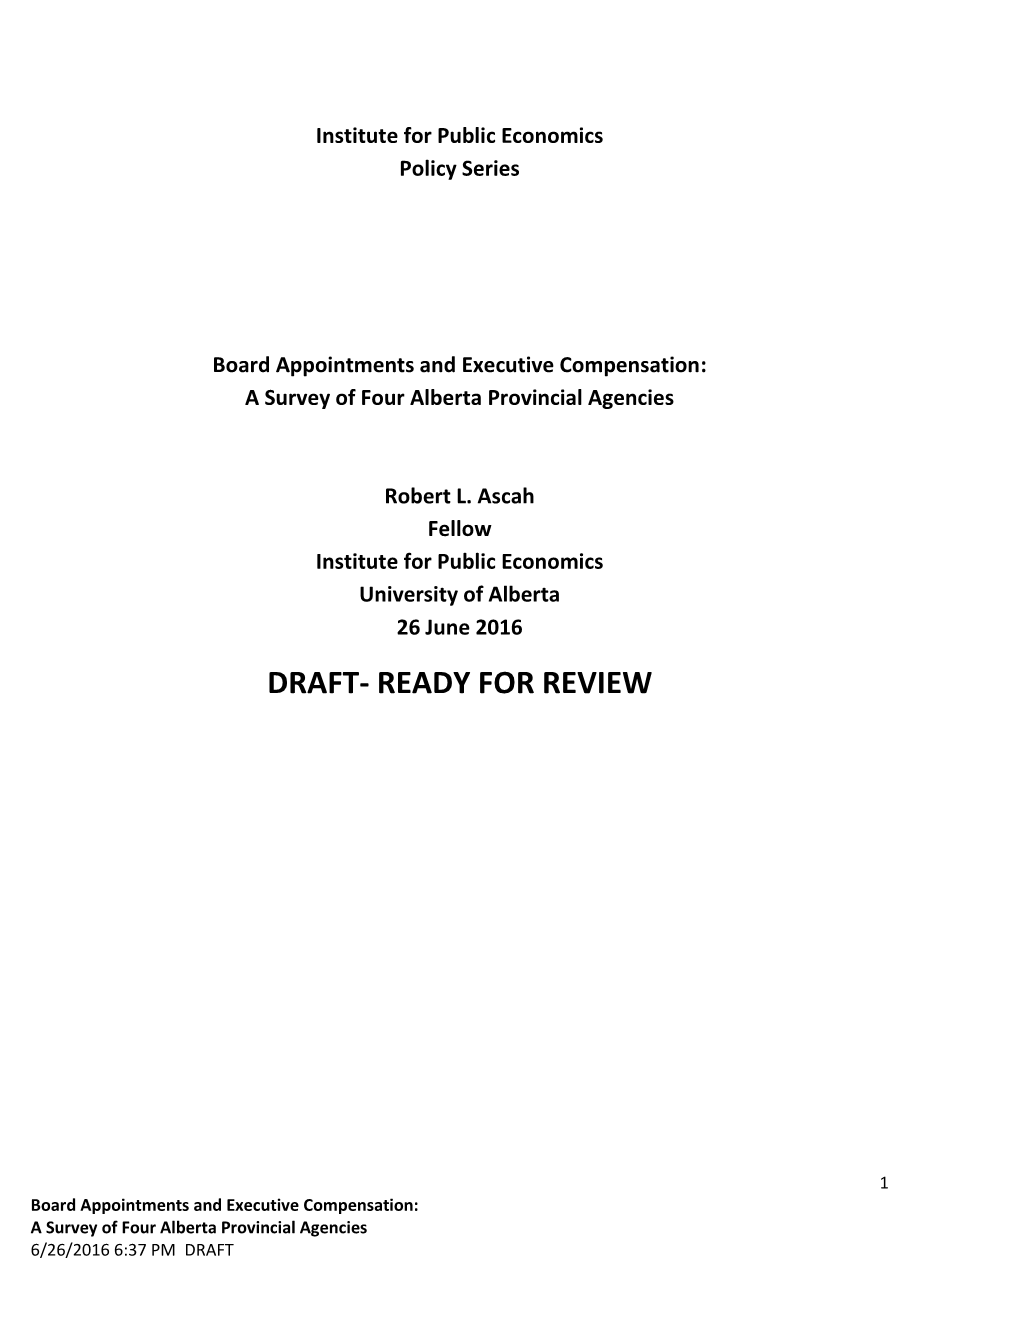 Board Appointments and Executive Compensation: a Survey of Four Alberta Provincial Agencies